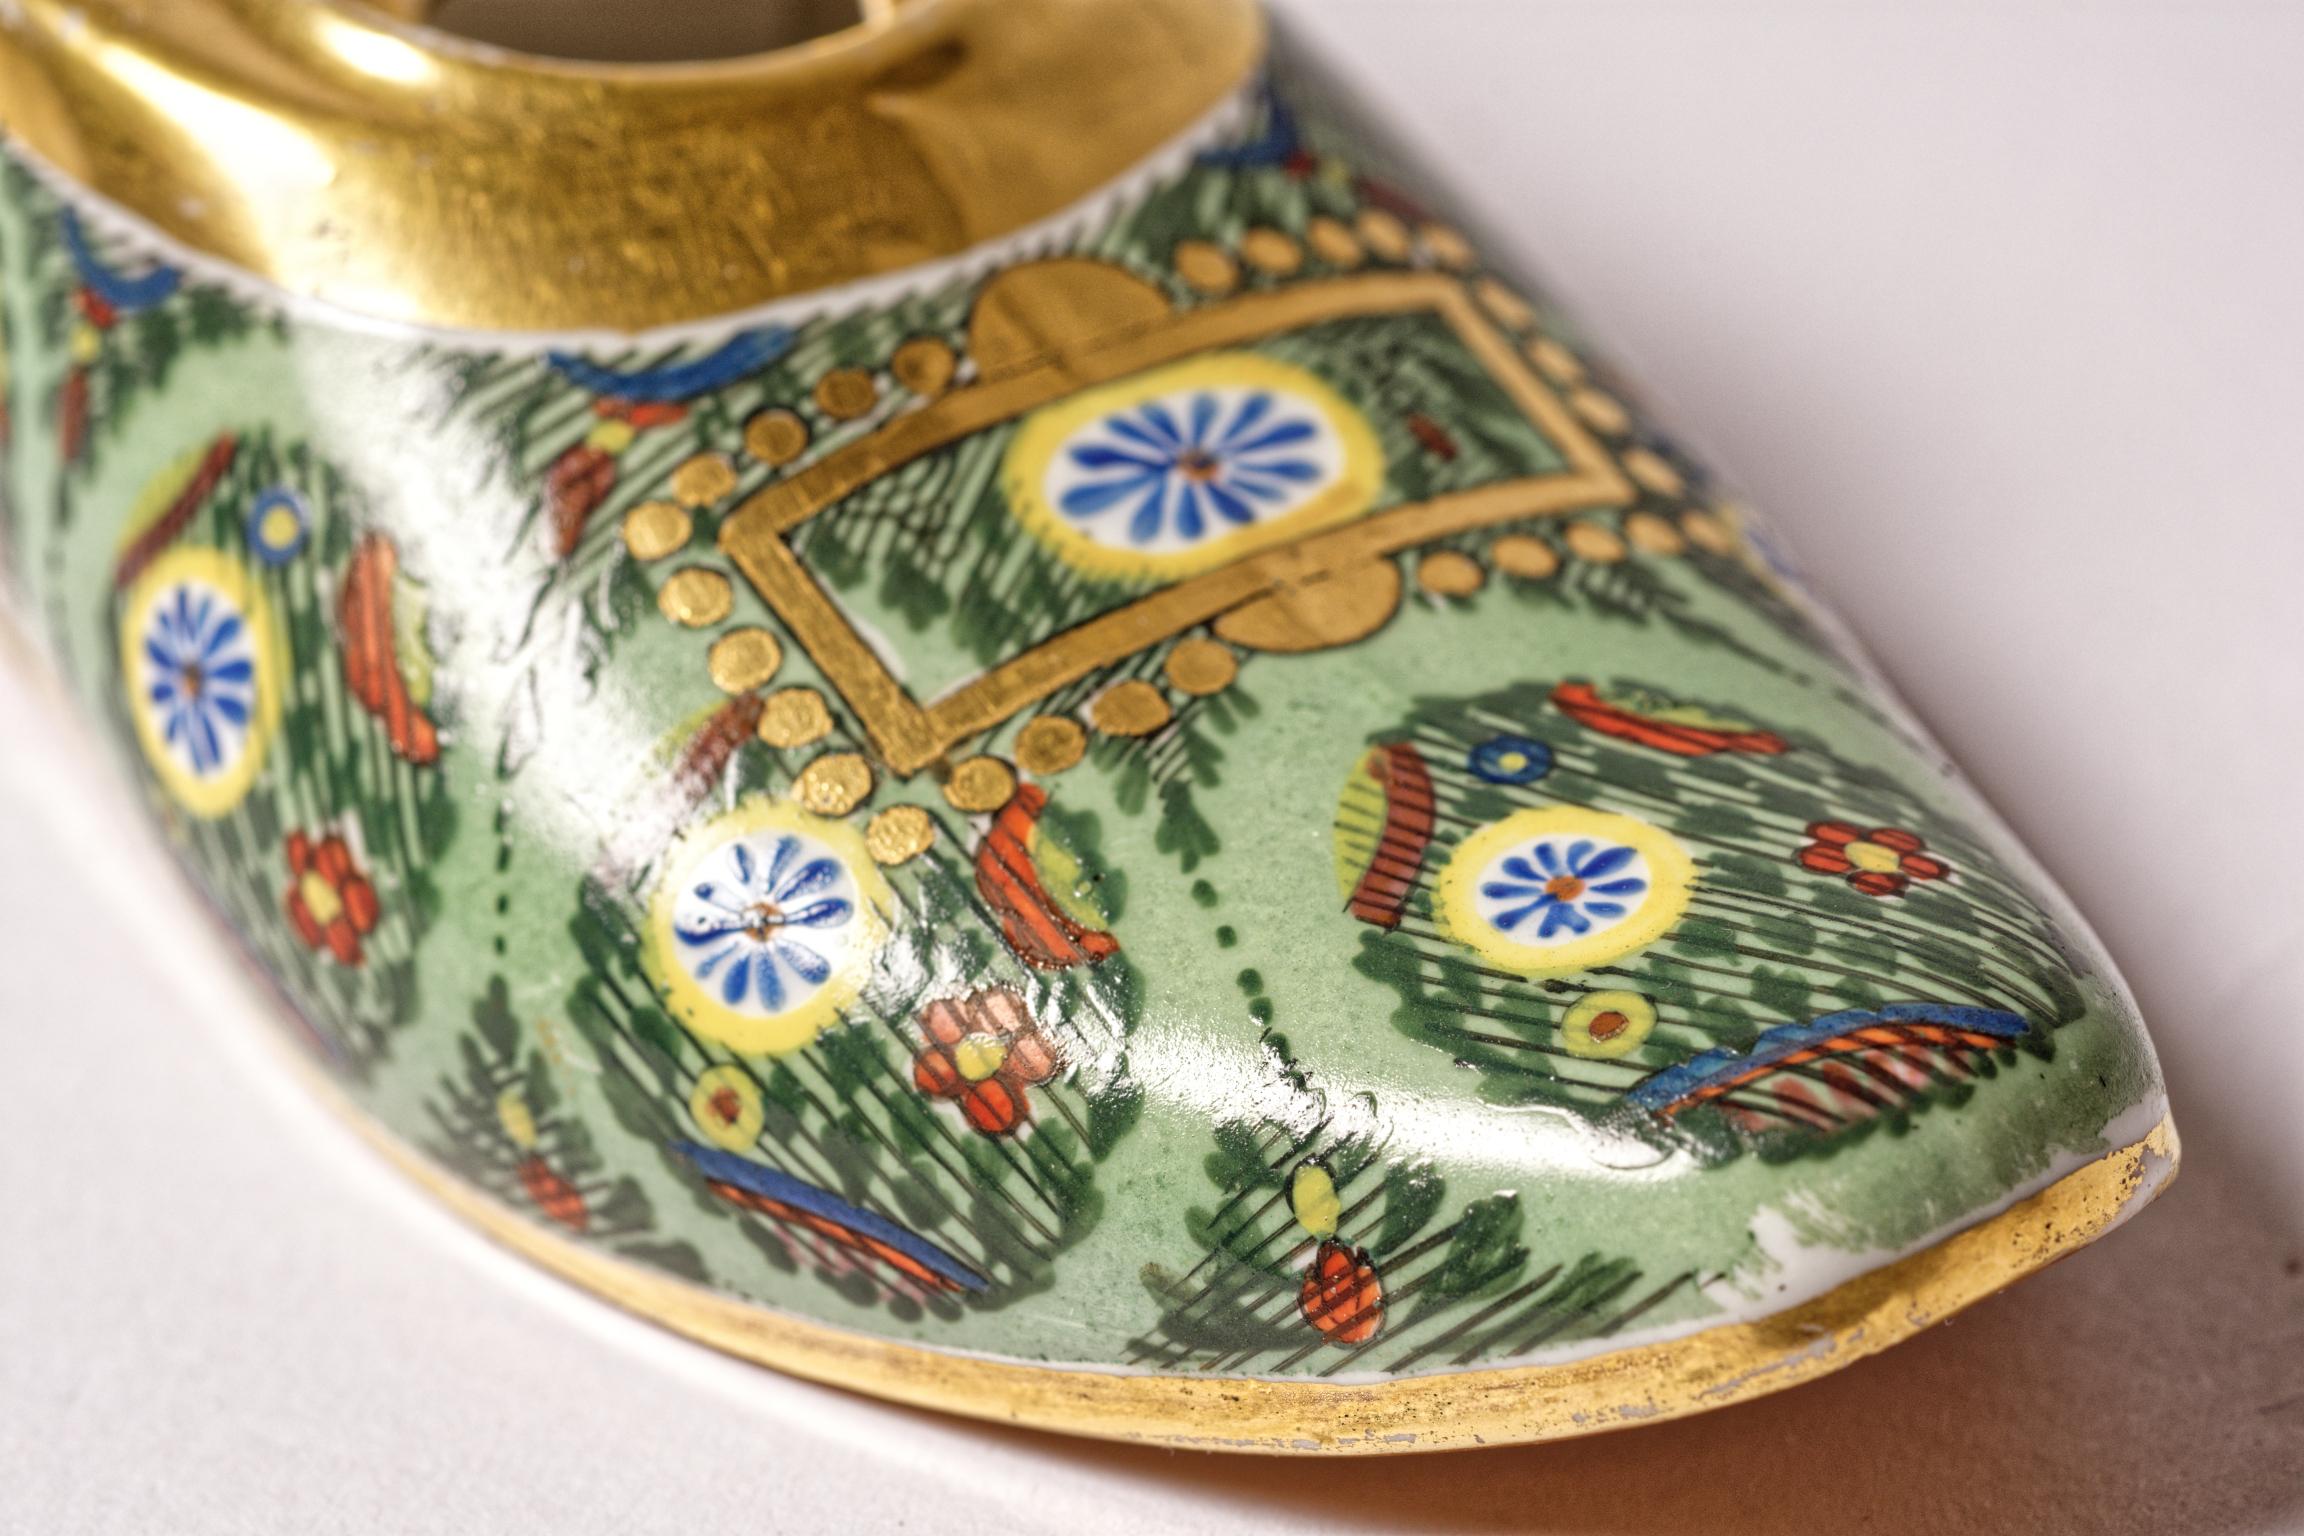 Chinoiserie Spode circa 1820 Vibrant Shoe or Slipper Inkwell Base, Hand Painted Rare Object